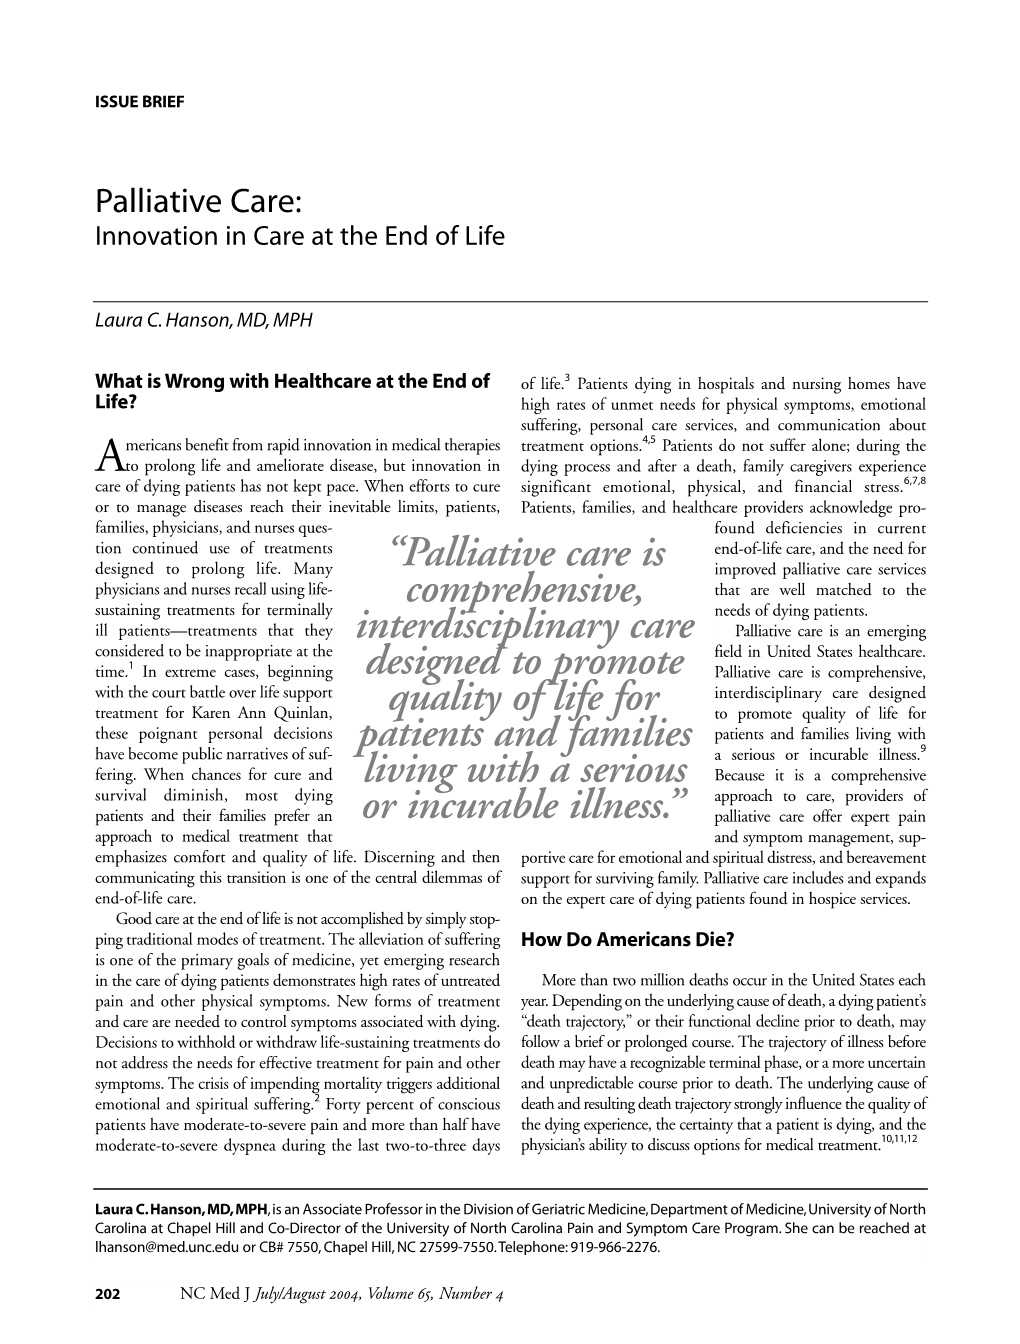 Palliative Care: Innovation in Care at the End of Life